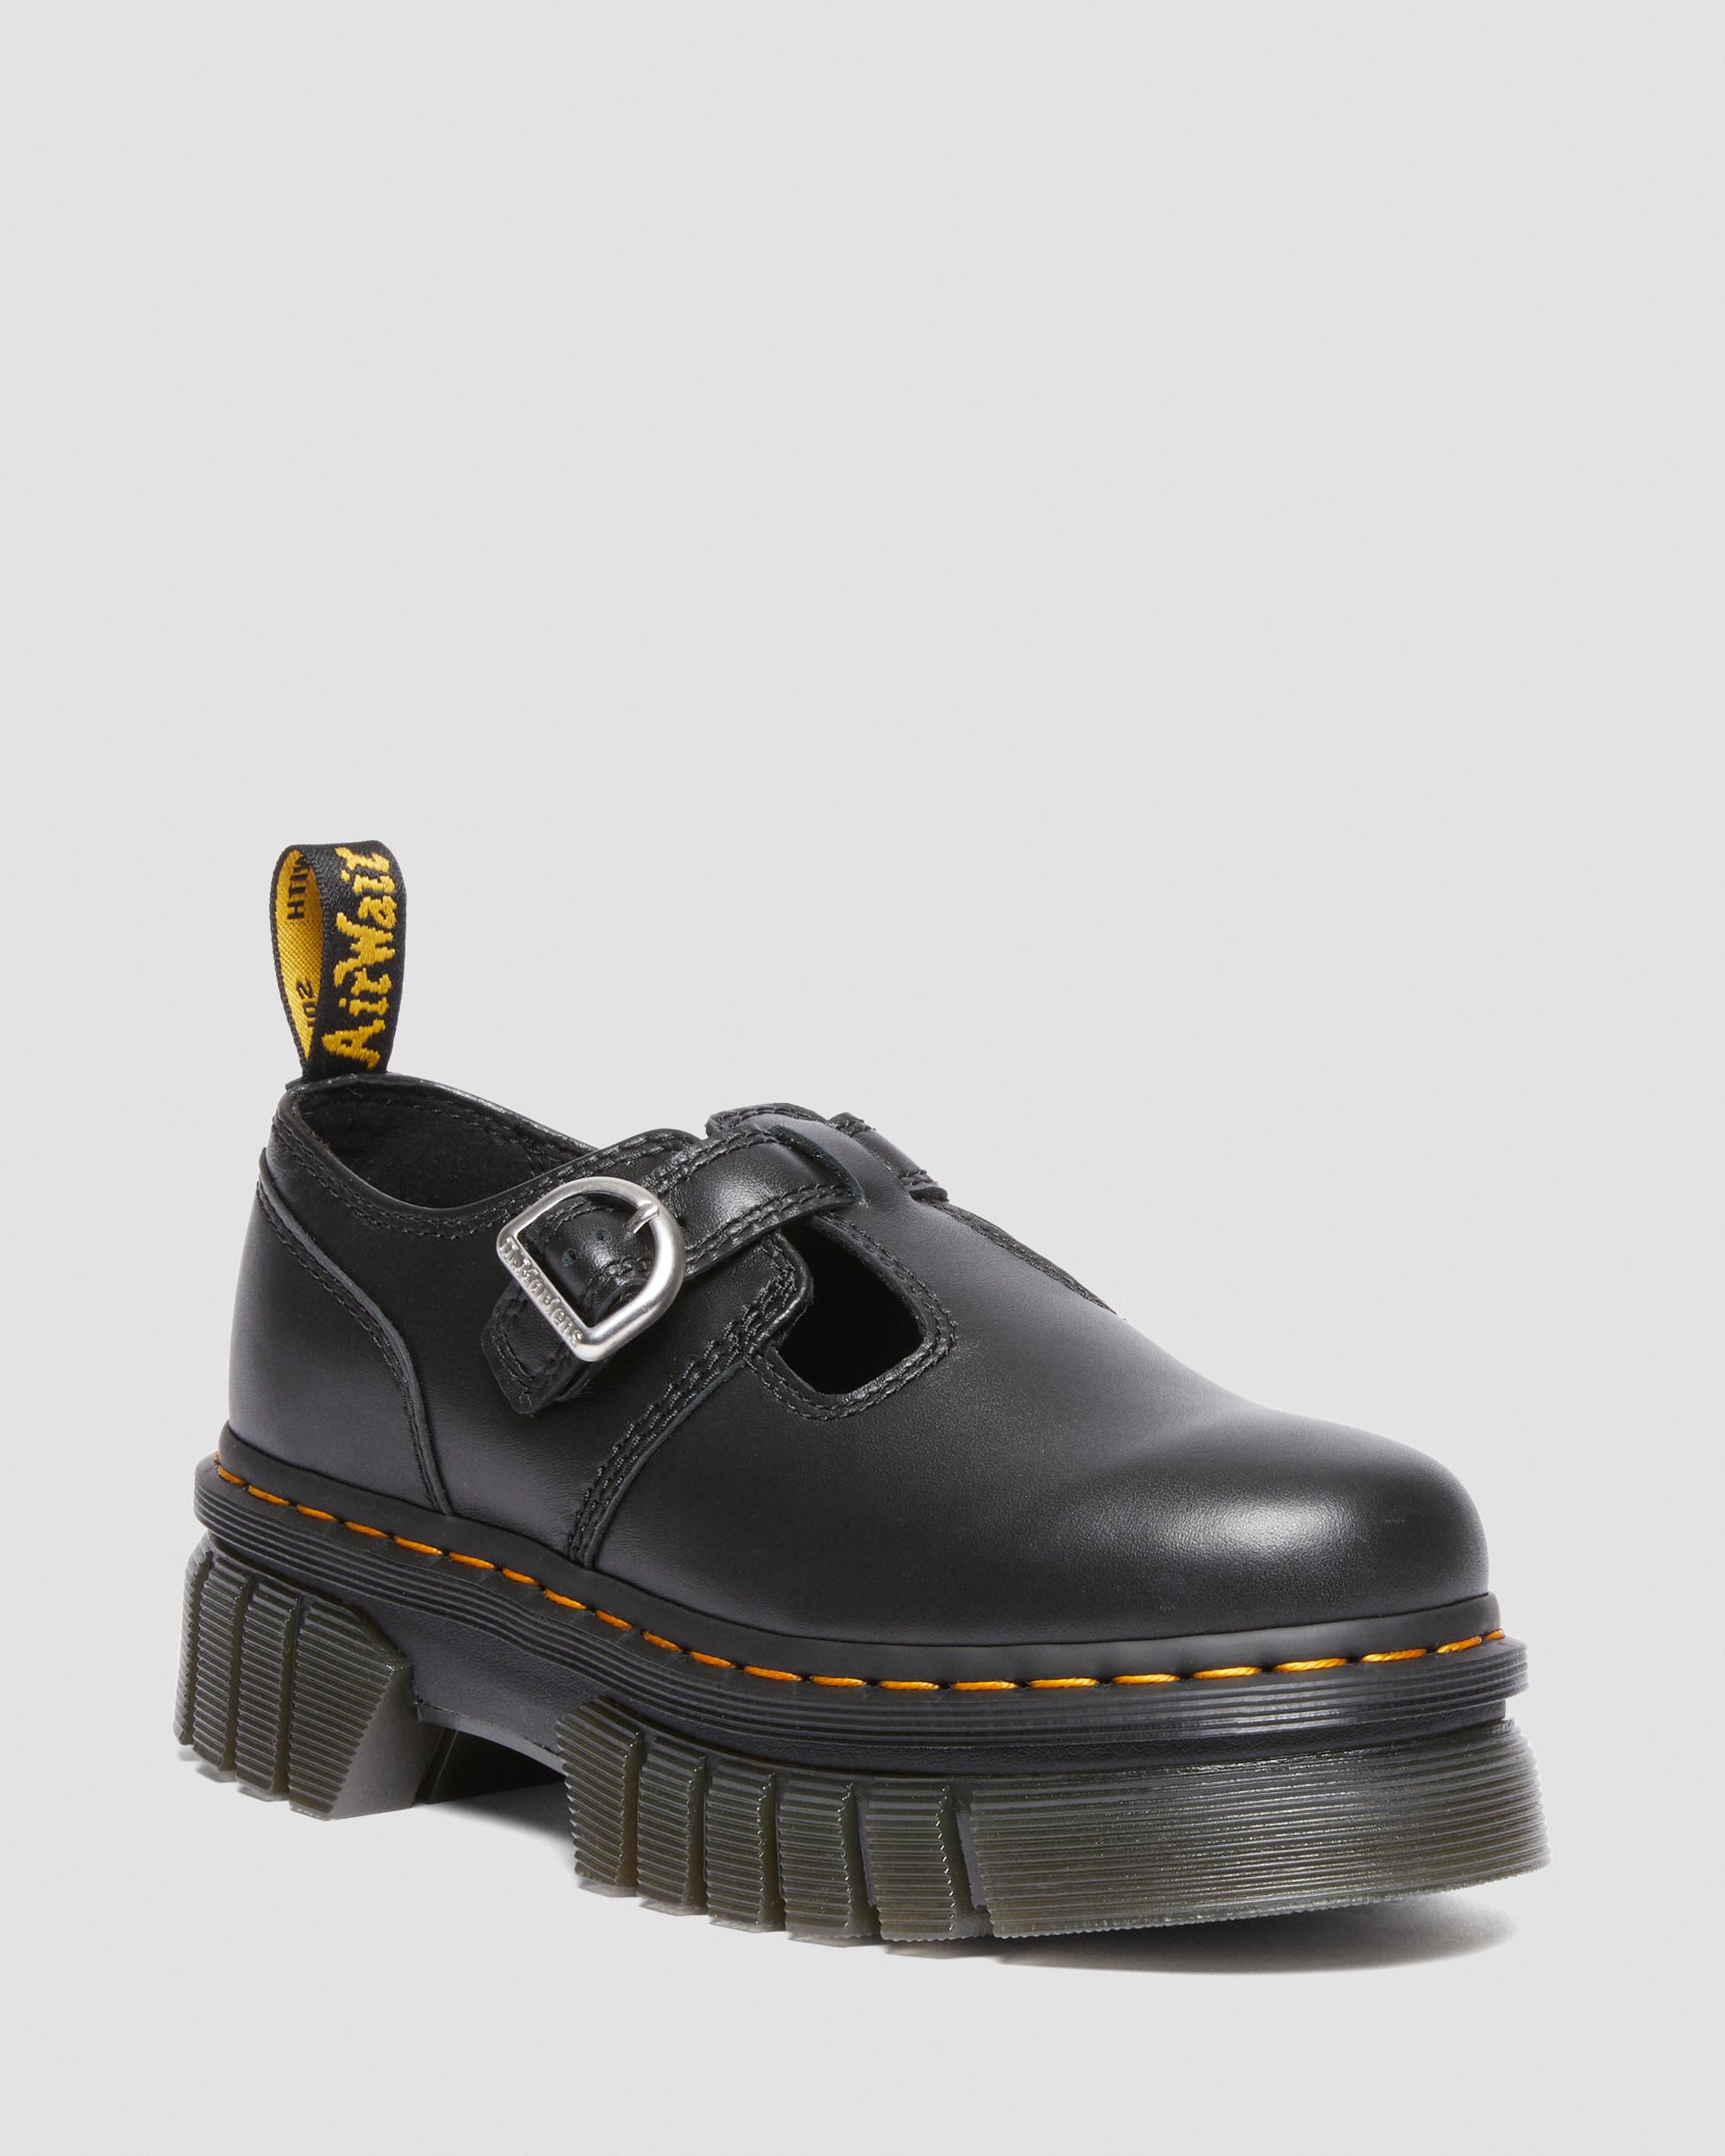 Audrick Nappa Lux Platform Mary Jane Shoes | Dr. Martens